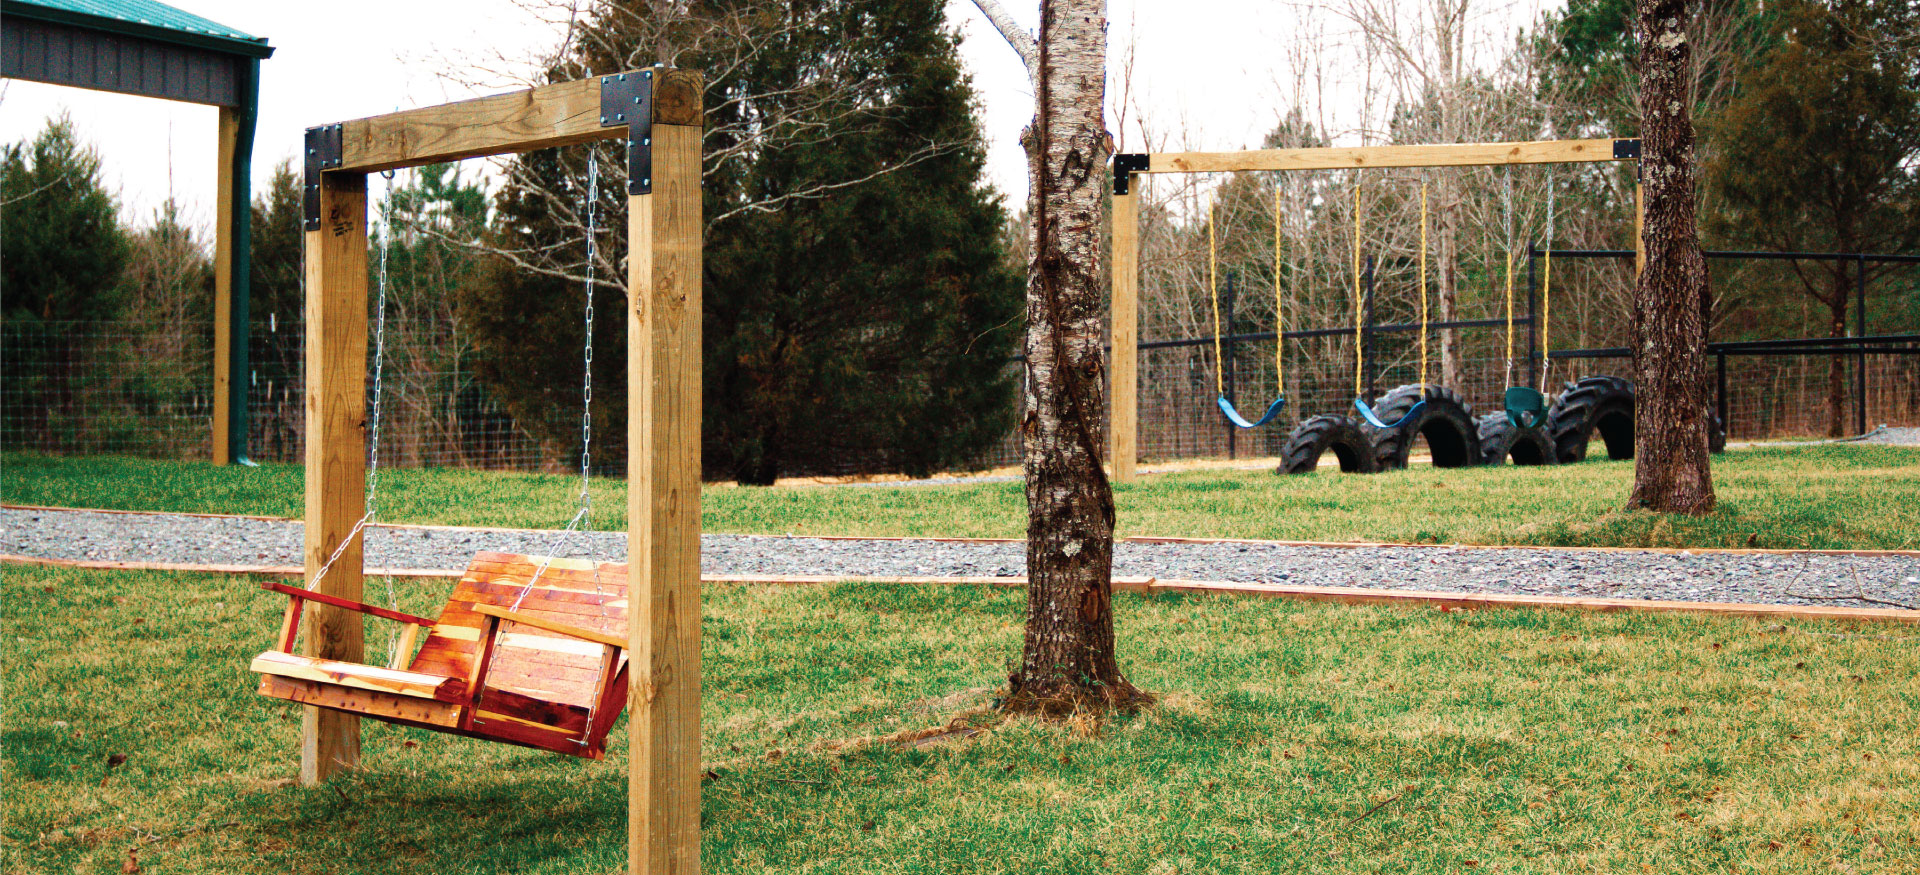 Exterior view of swingset and chair